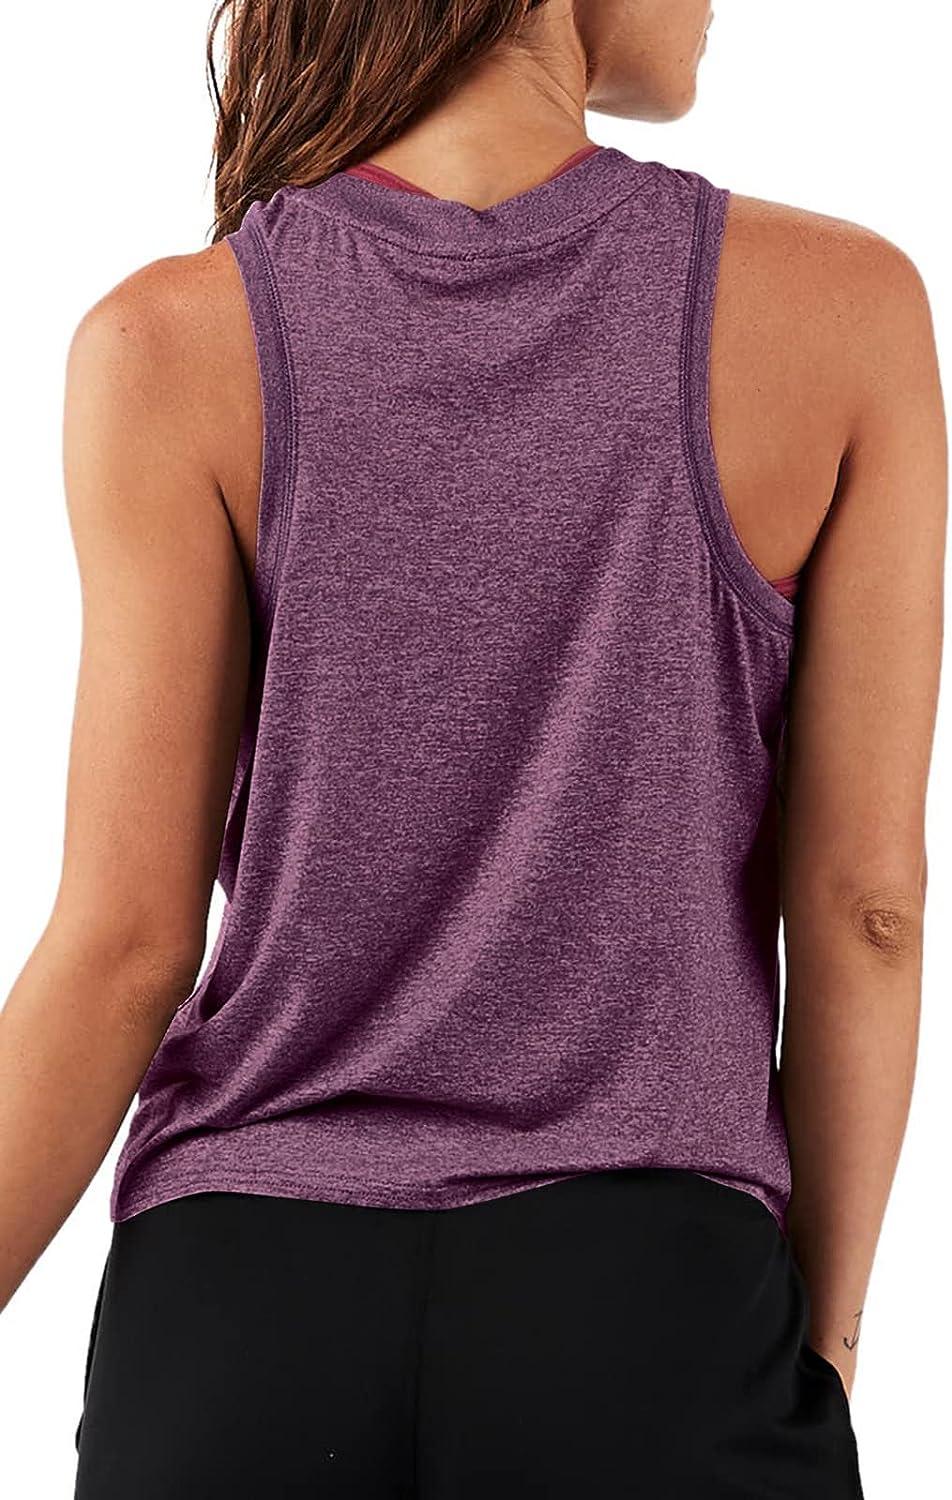 GetUSCart- Mippo Cute Workout Tops for Women Yoga Tank Tops Loose Fit  Sleeveless Athletic Gym Tops Open Back Tennis Shirts Muscle Tank Summer Workout  Clothes for Women Violet Purple M